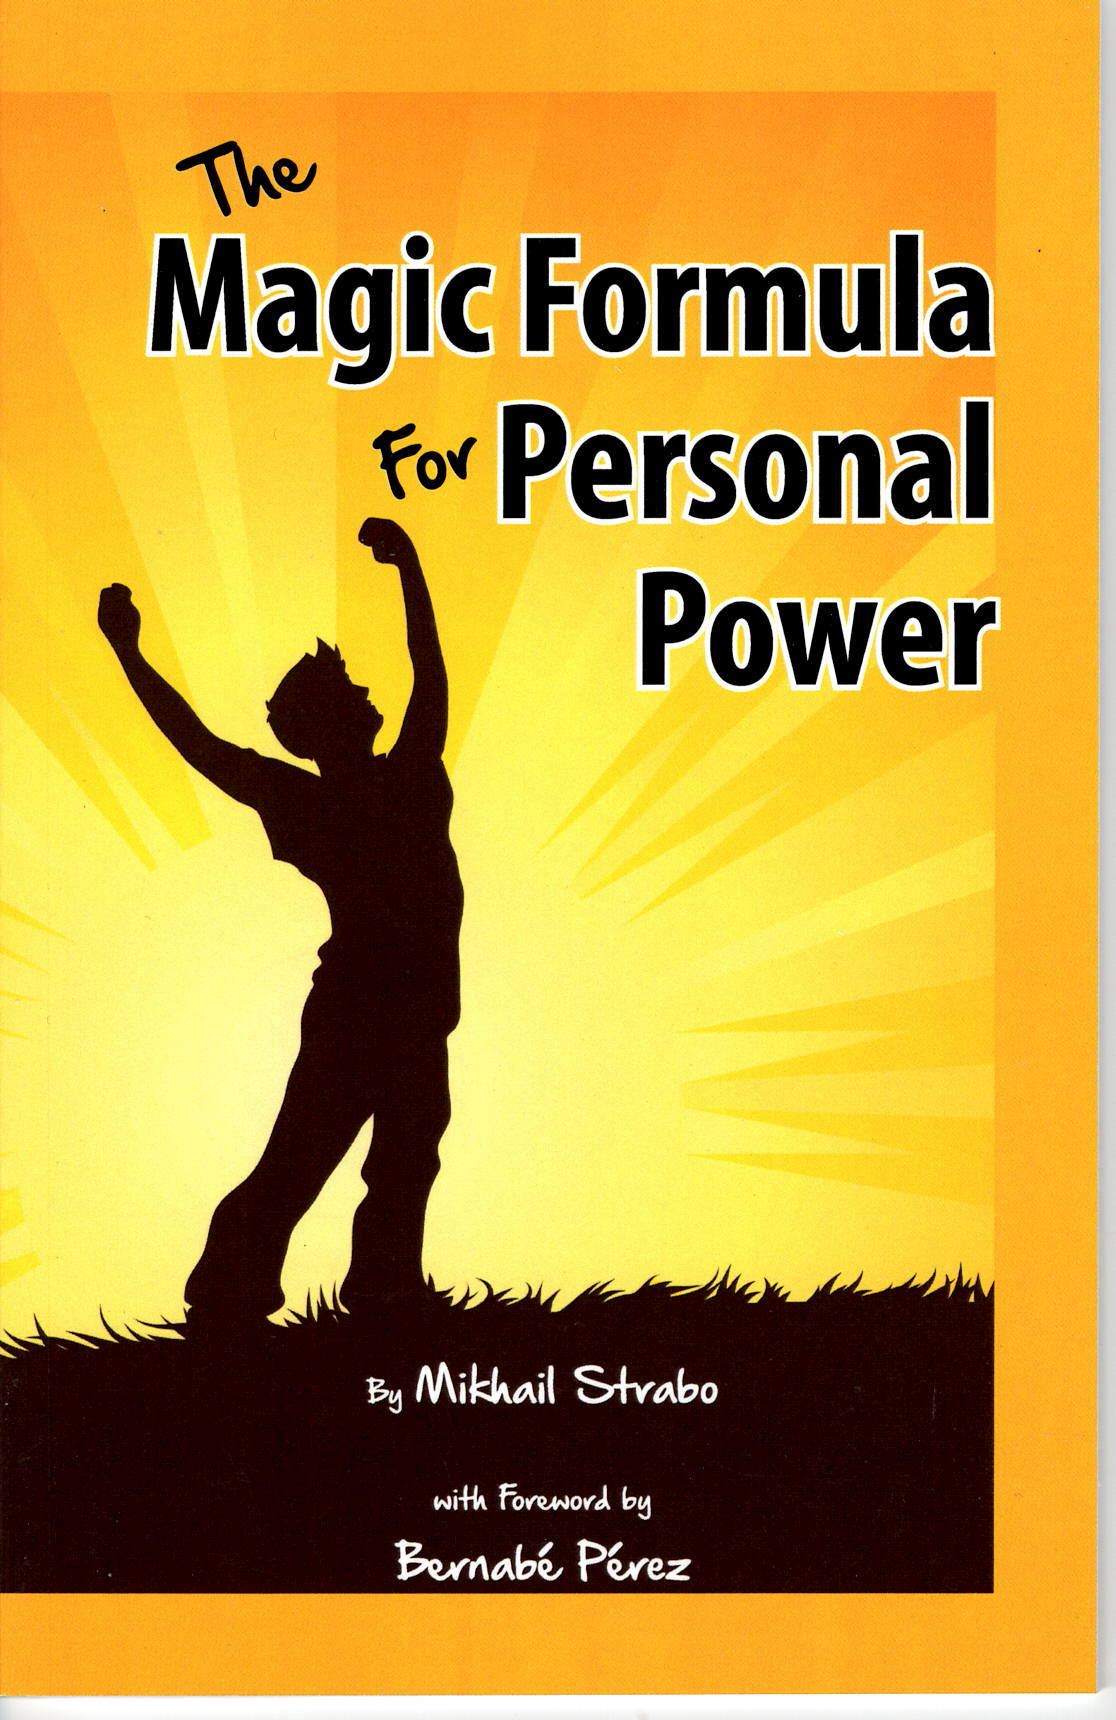 The Magic Formula for Personal Power, by Mikhail Strabo